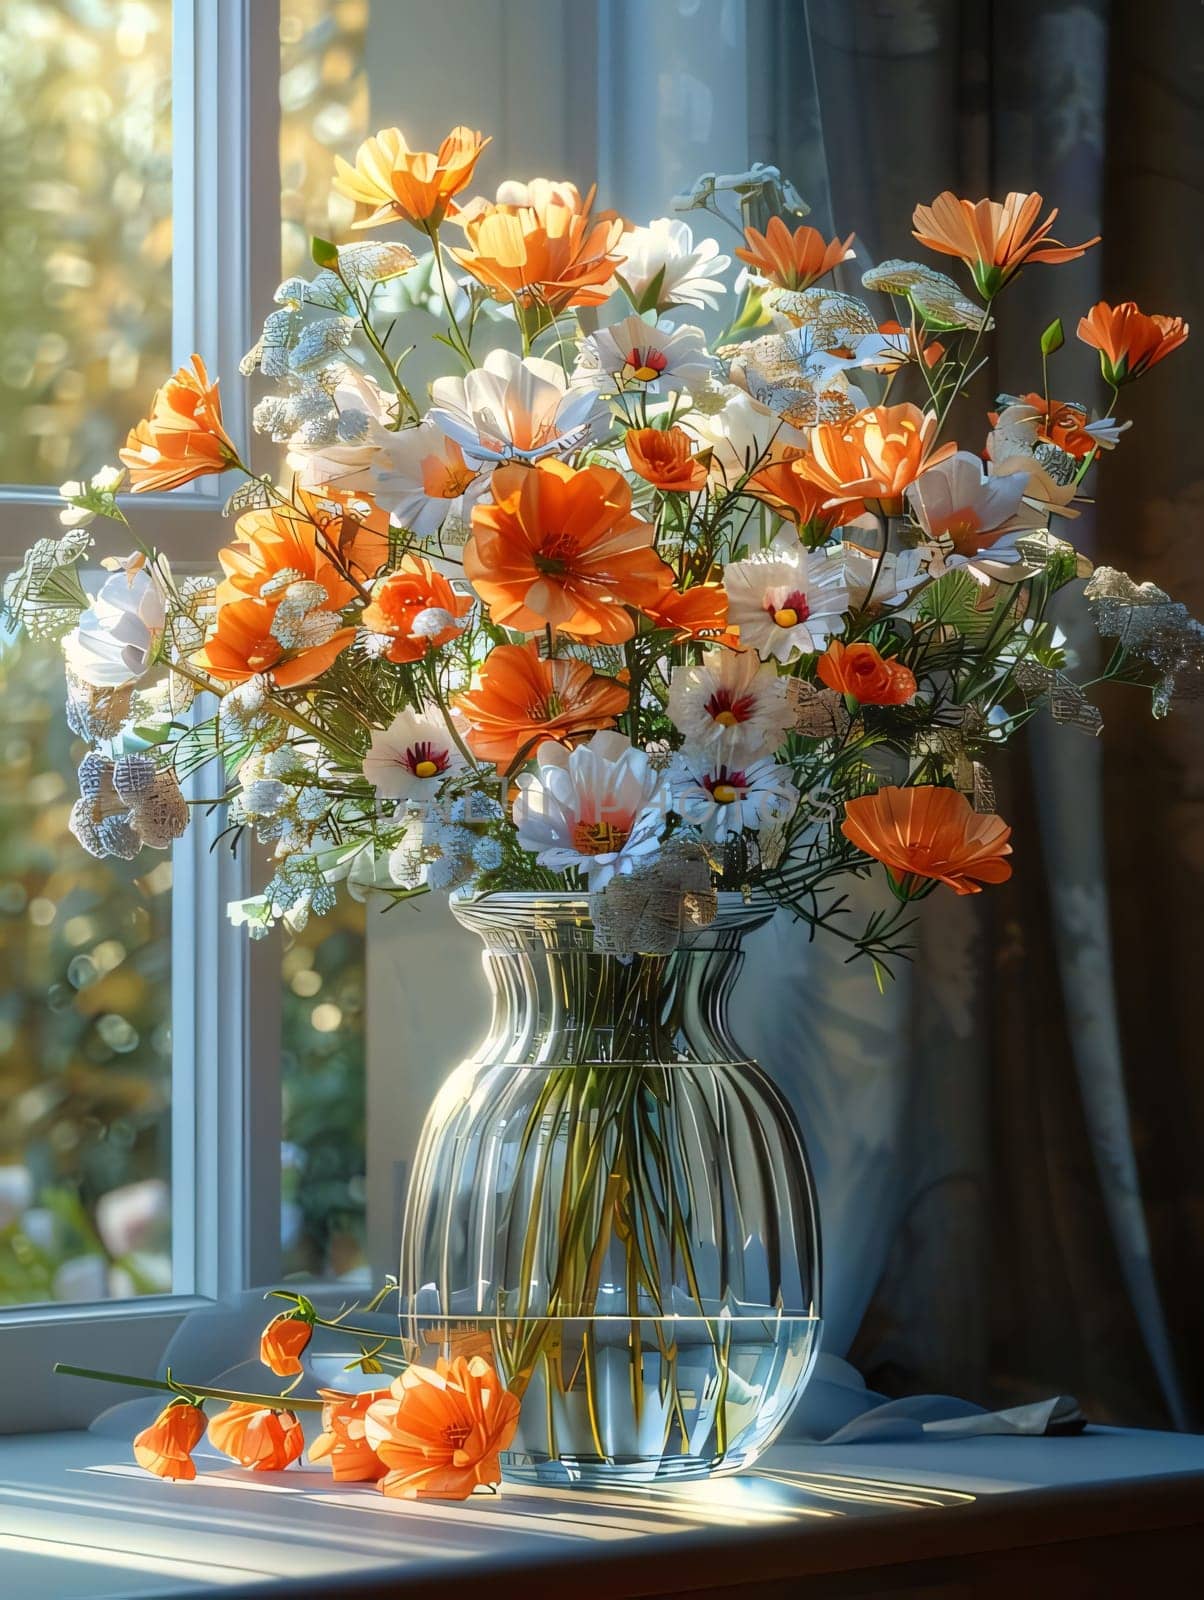 Transparent vase standing on the windowsill in the background window vase of white orange flowers. Flowering flowers, a symbol of spring, new life. A joyful time of nature awakening to life.